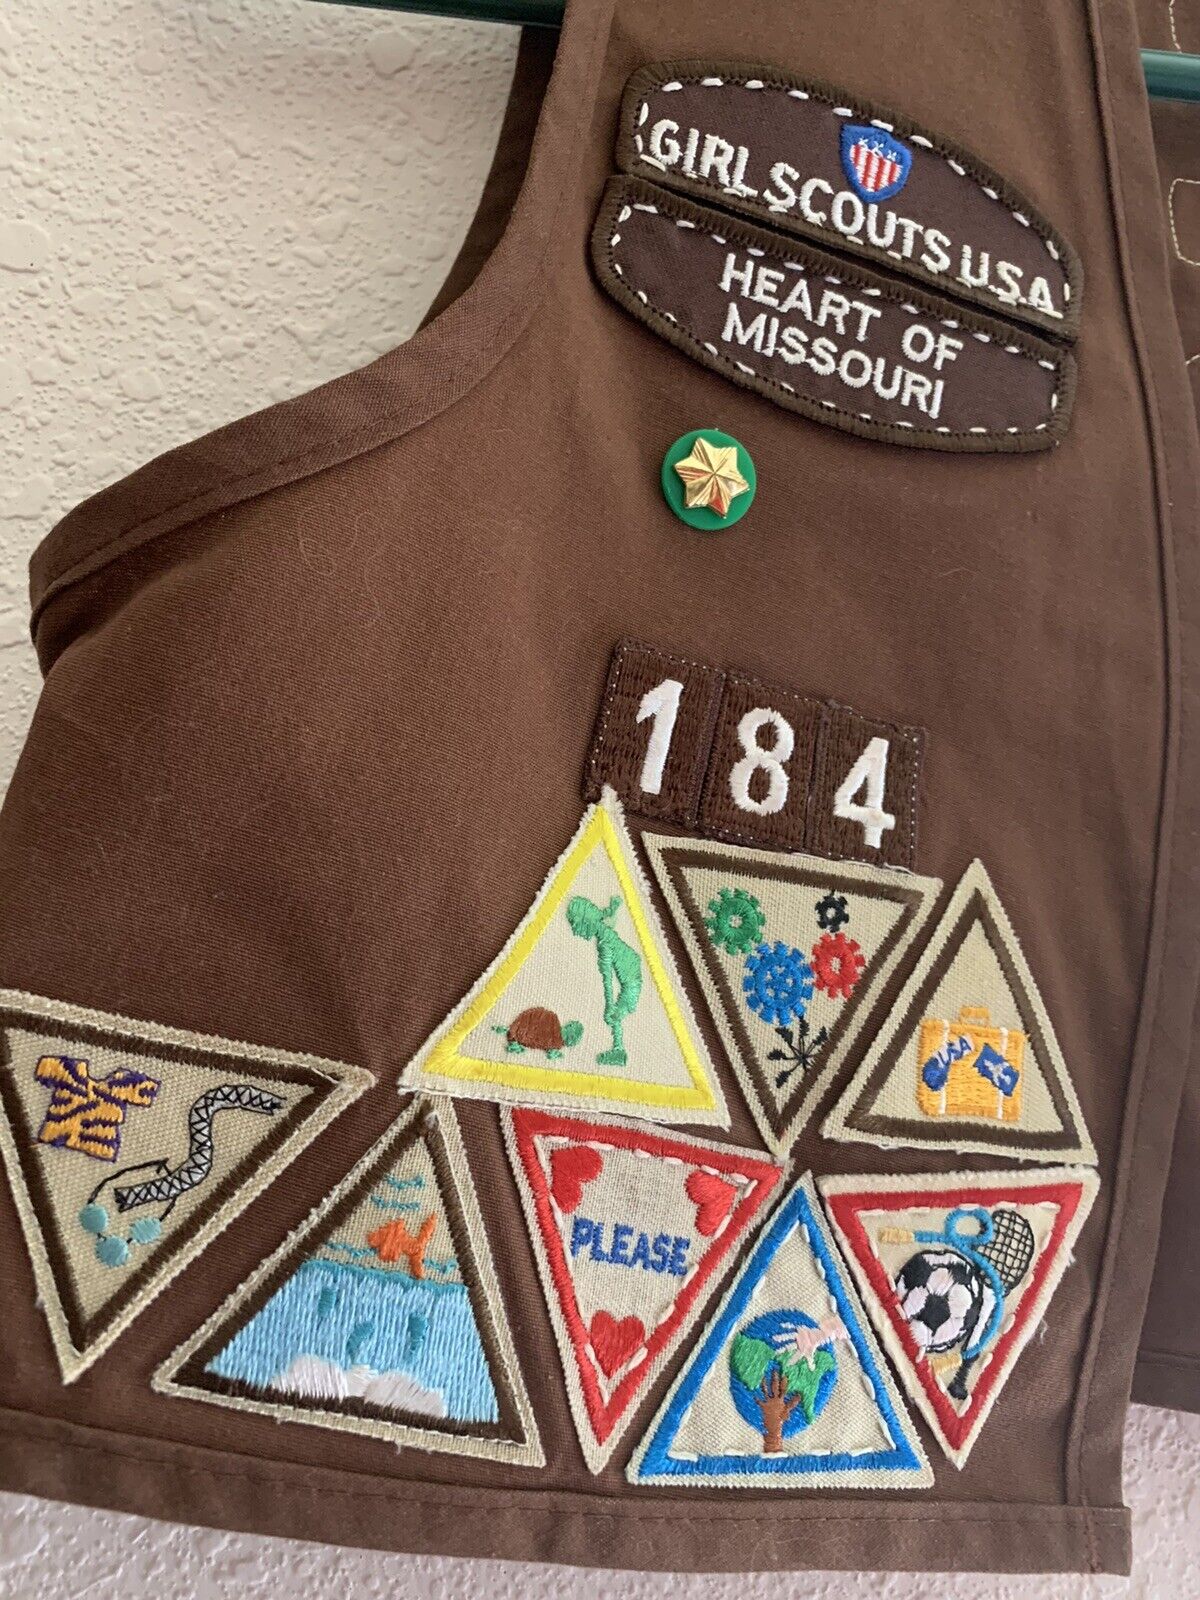 Craft Arts Scrapbooking Girl Scout Vest Vintage Patches and Pins Medium